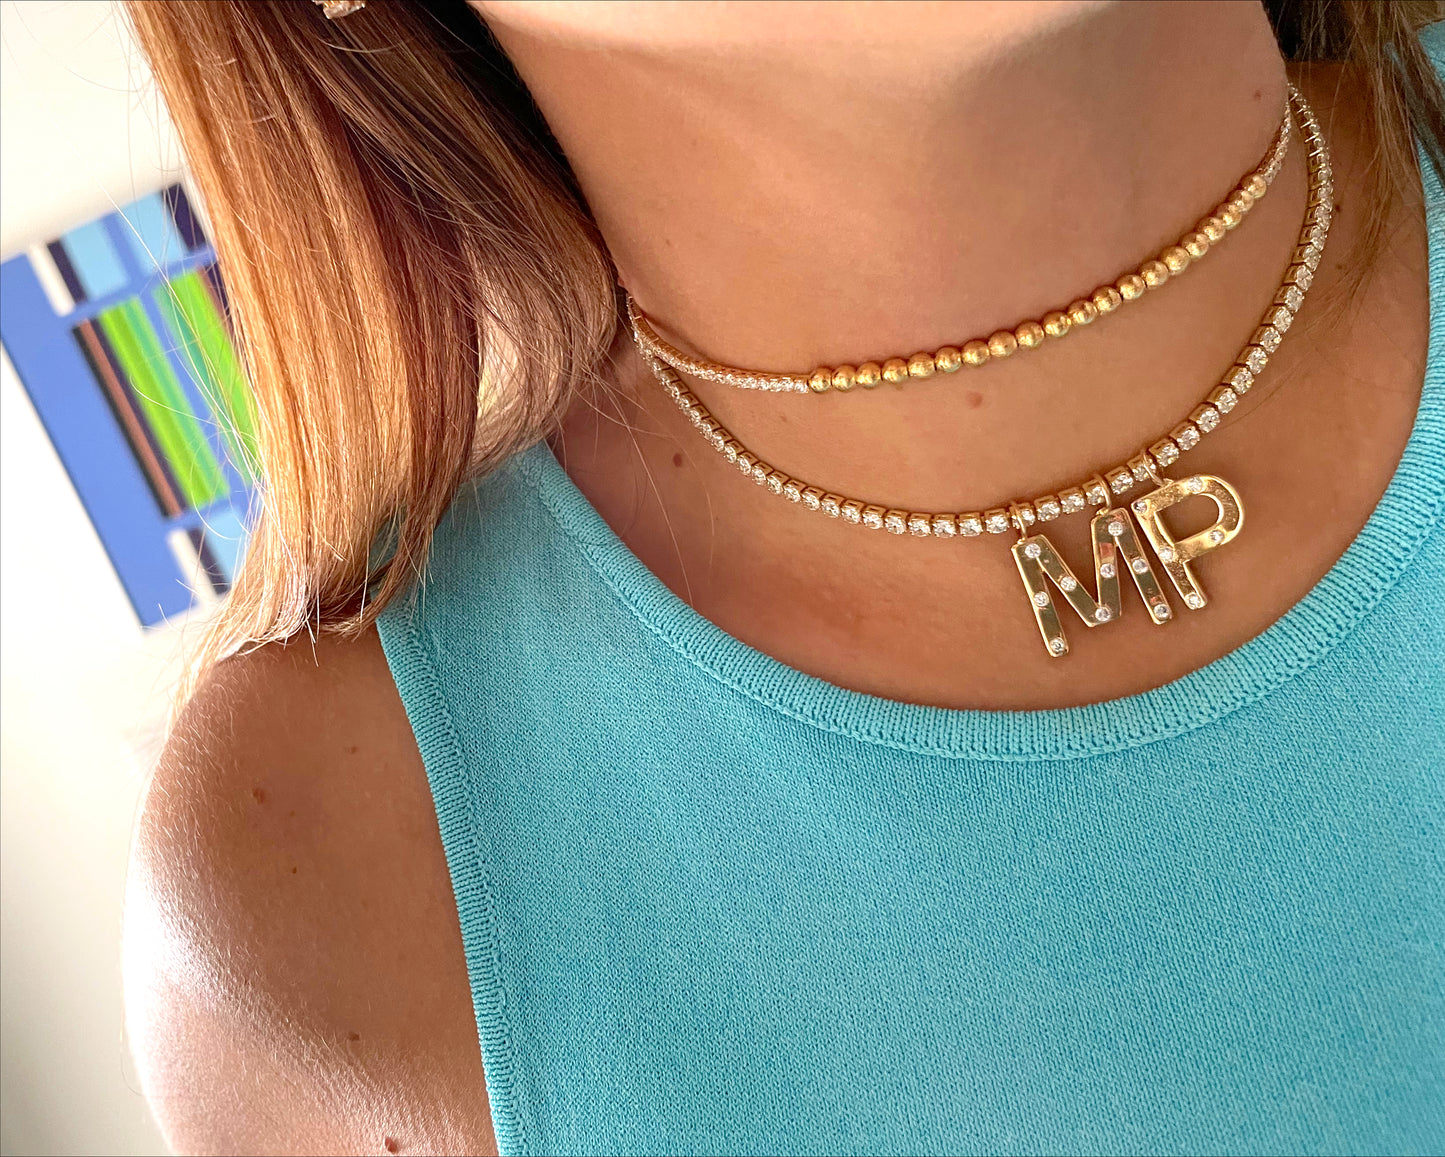 Tennis necklace with gold zirconia letters